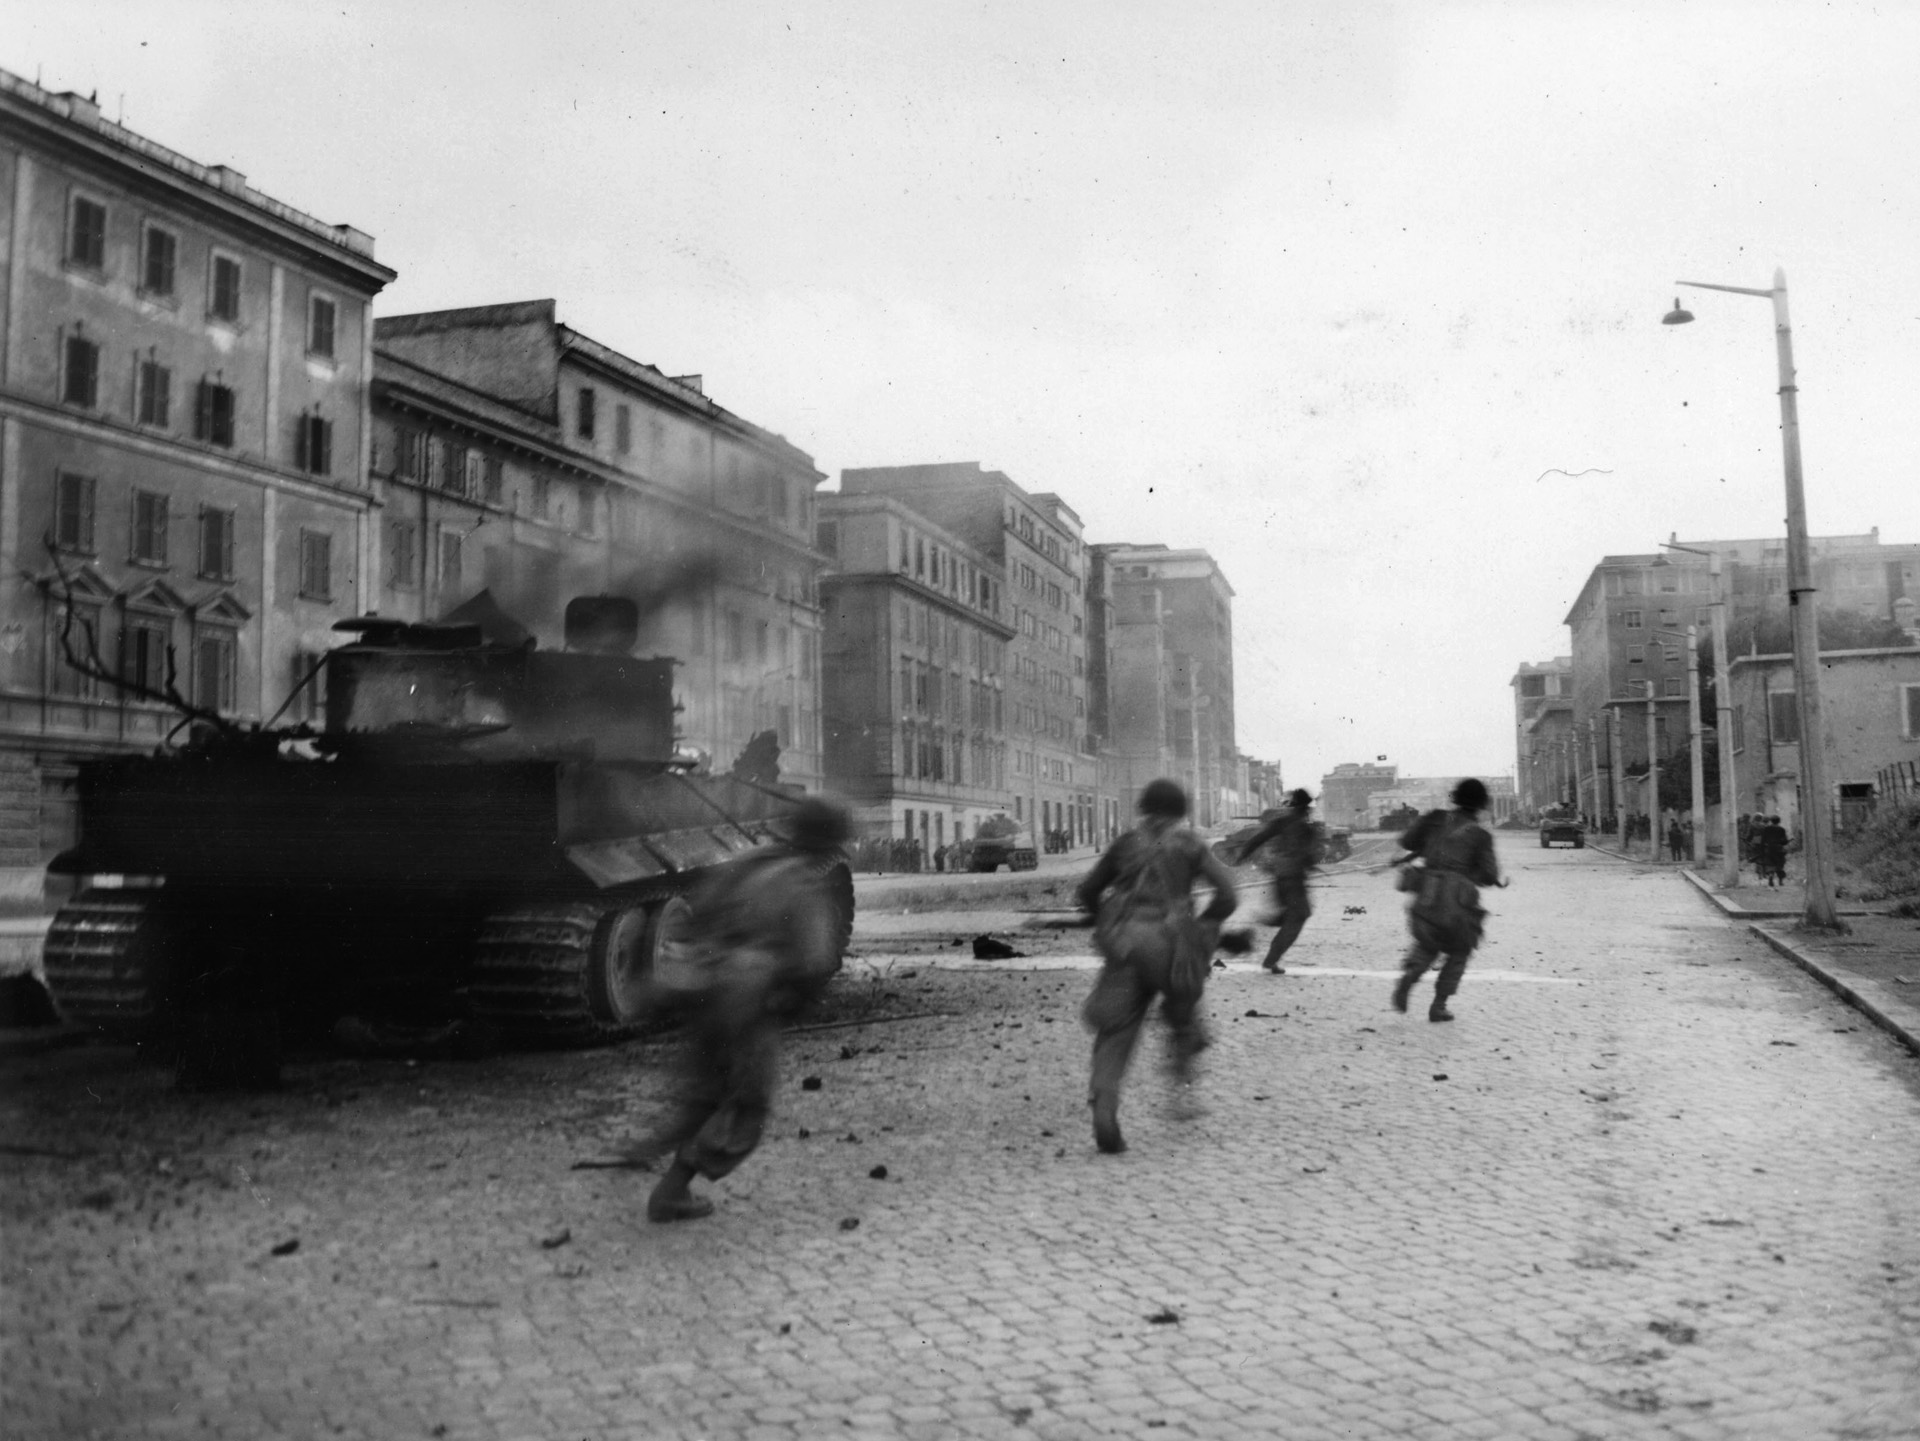 American soldiers, among the first Allied troops to enter Rome, sprint past a burning German tank to take up positions along a city street. An American tank, providing fire support as the infantrymen clear houses, is seen in the distance at right.